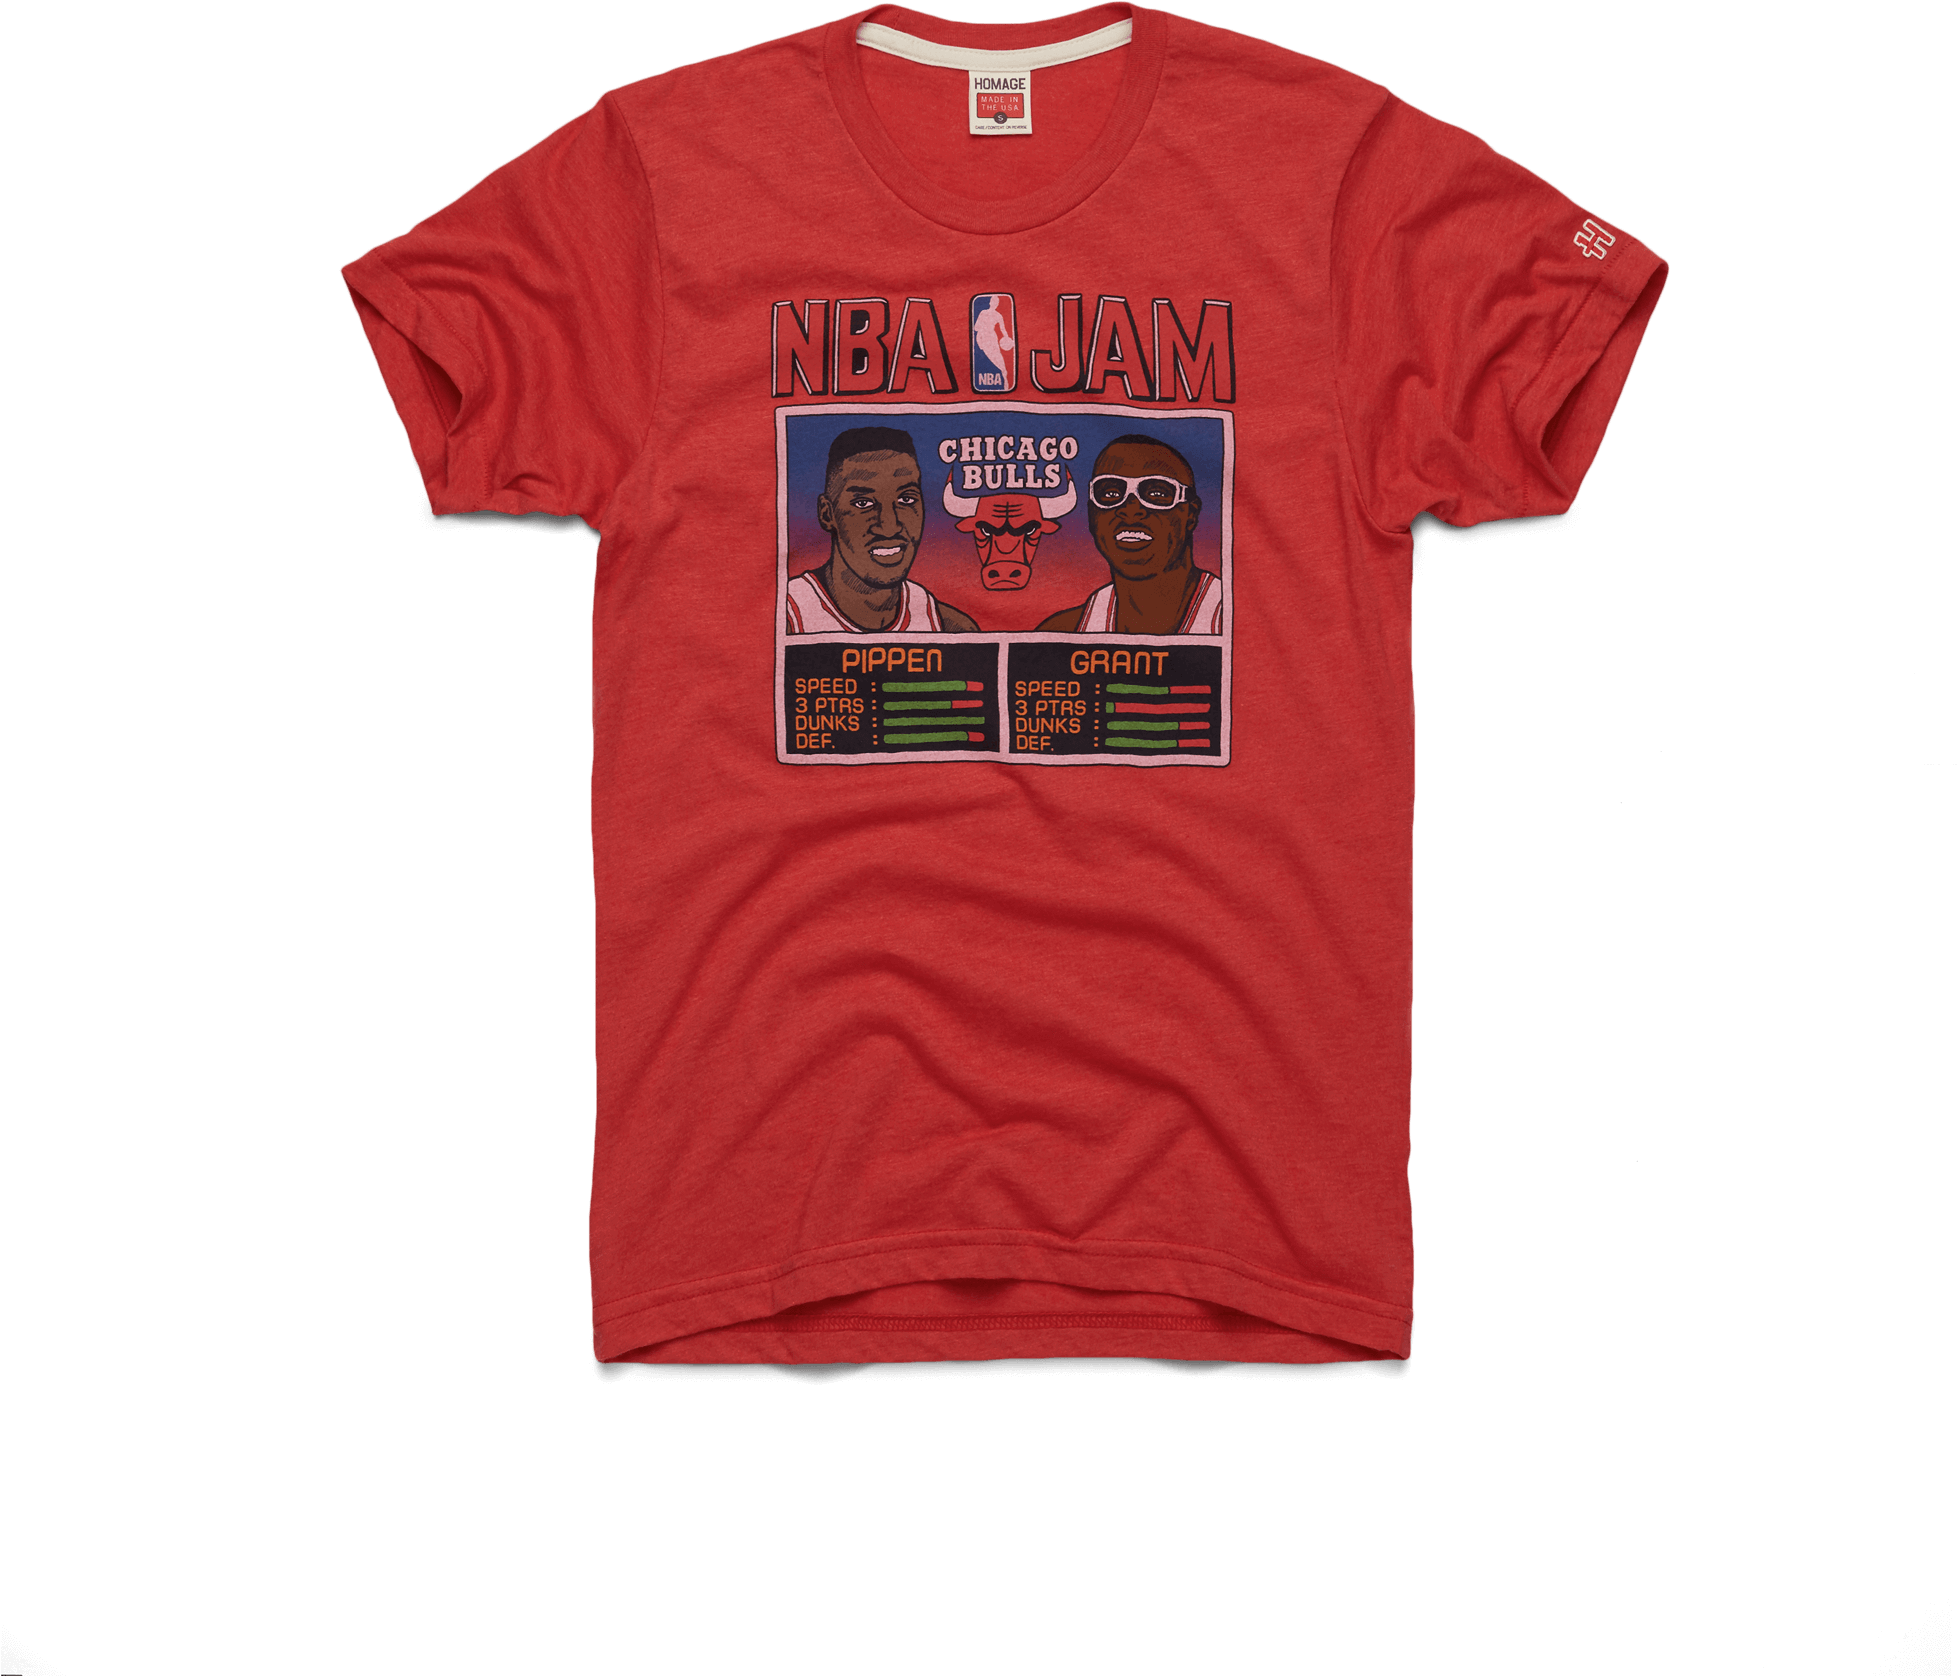 Boomshakalaka Rep One Of The Greatest Duos In Nba Jam - Petrovic Nba Jam T Shirt (2000x2000), Png Download